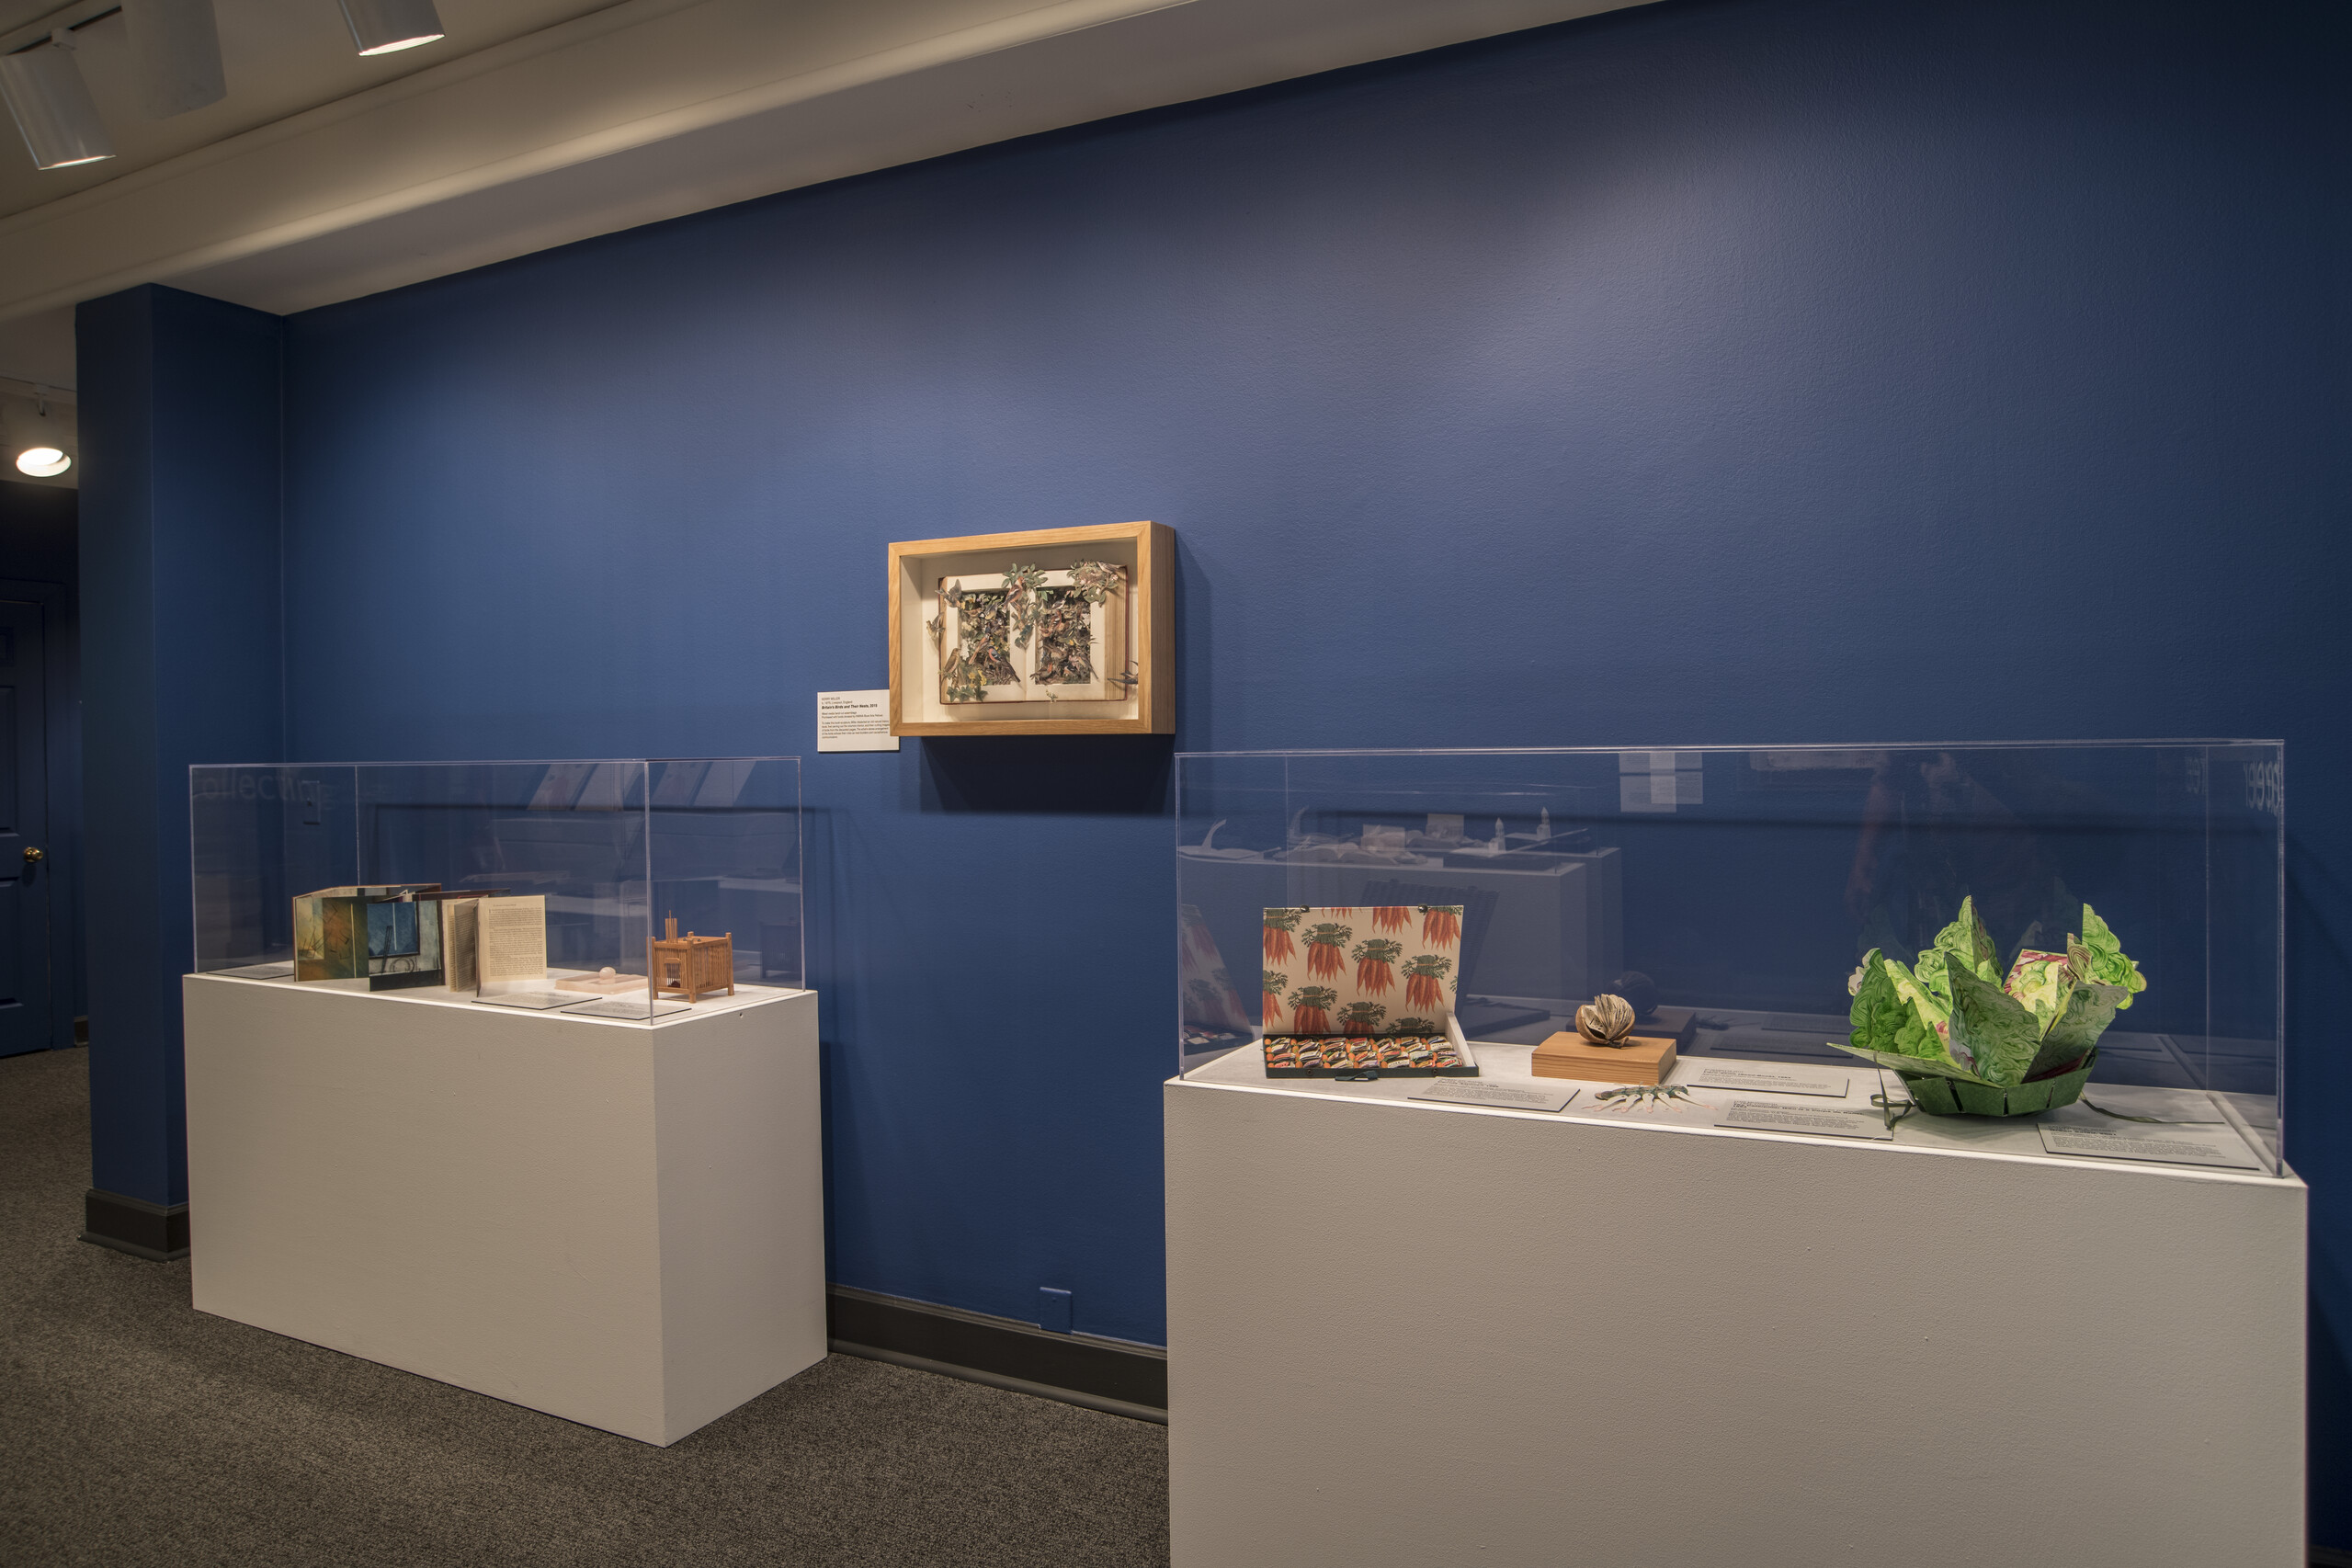 A color photograph of two cases and wall frame containing sculptural artist's books against a blue wall.